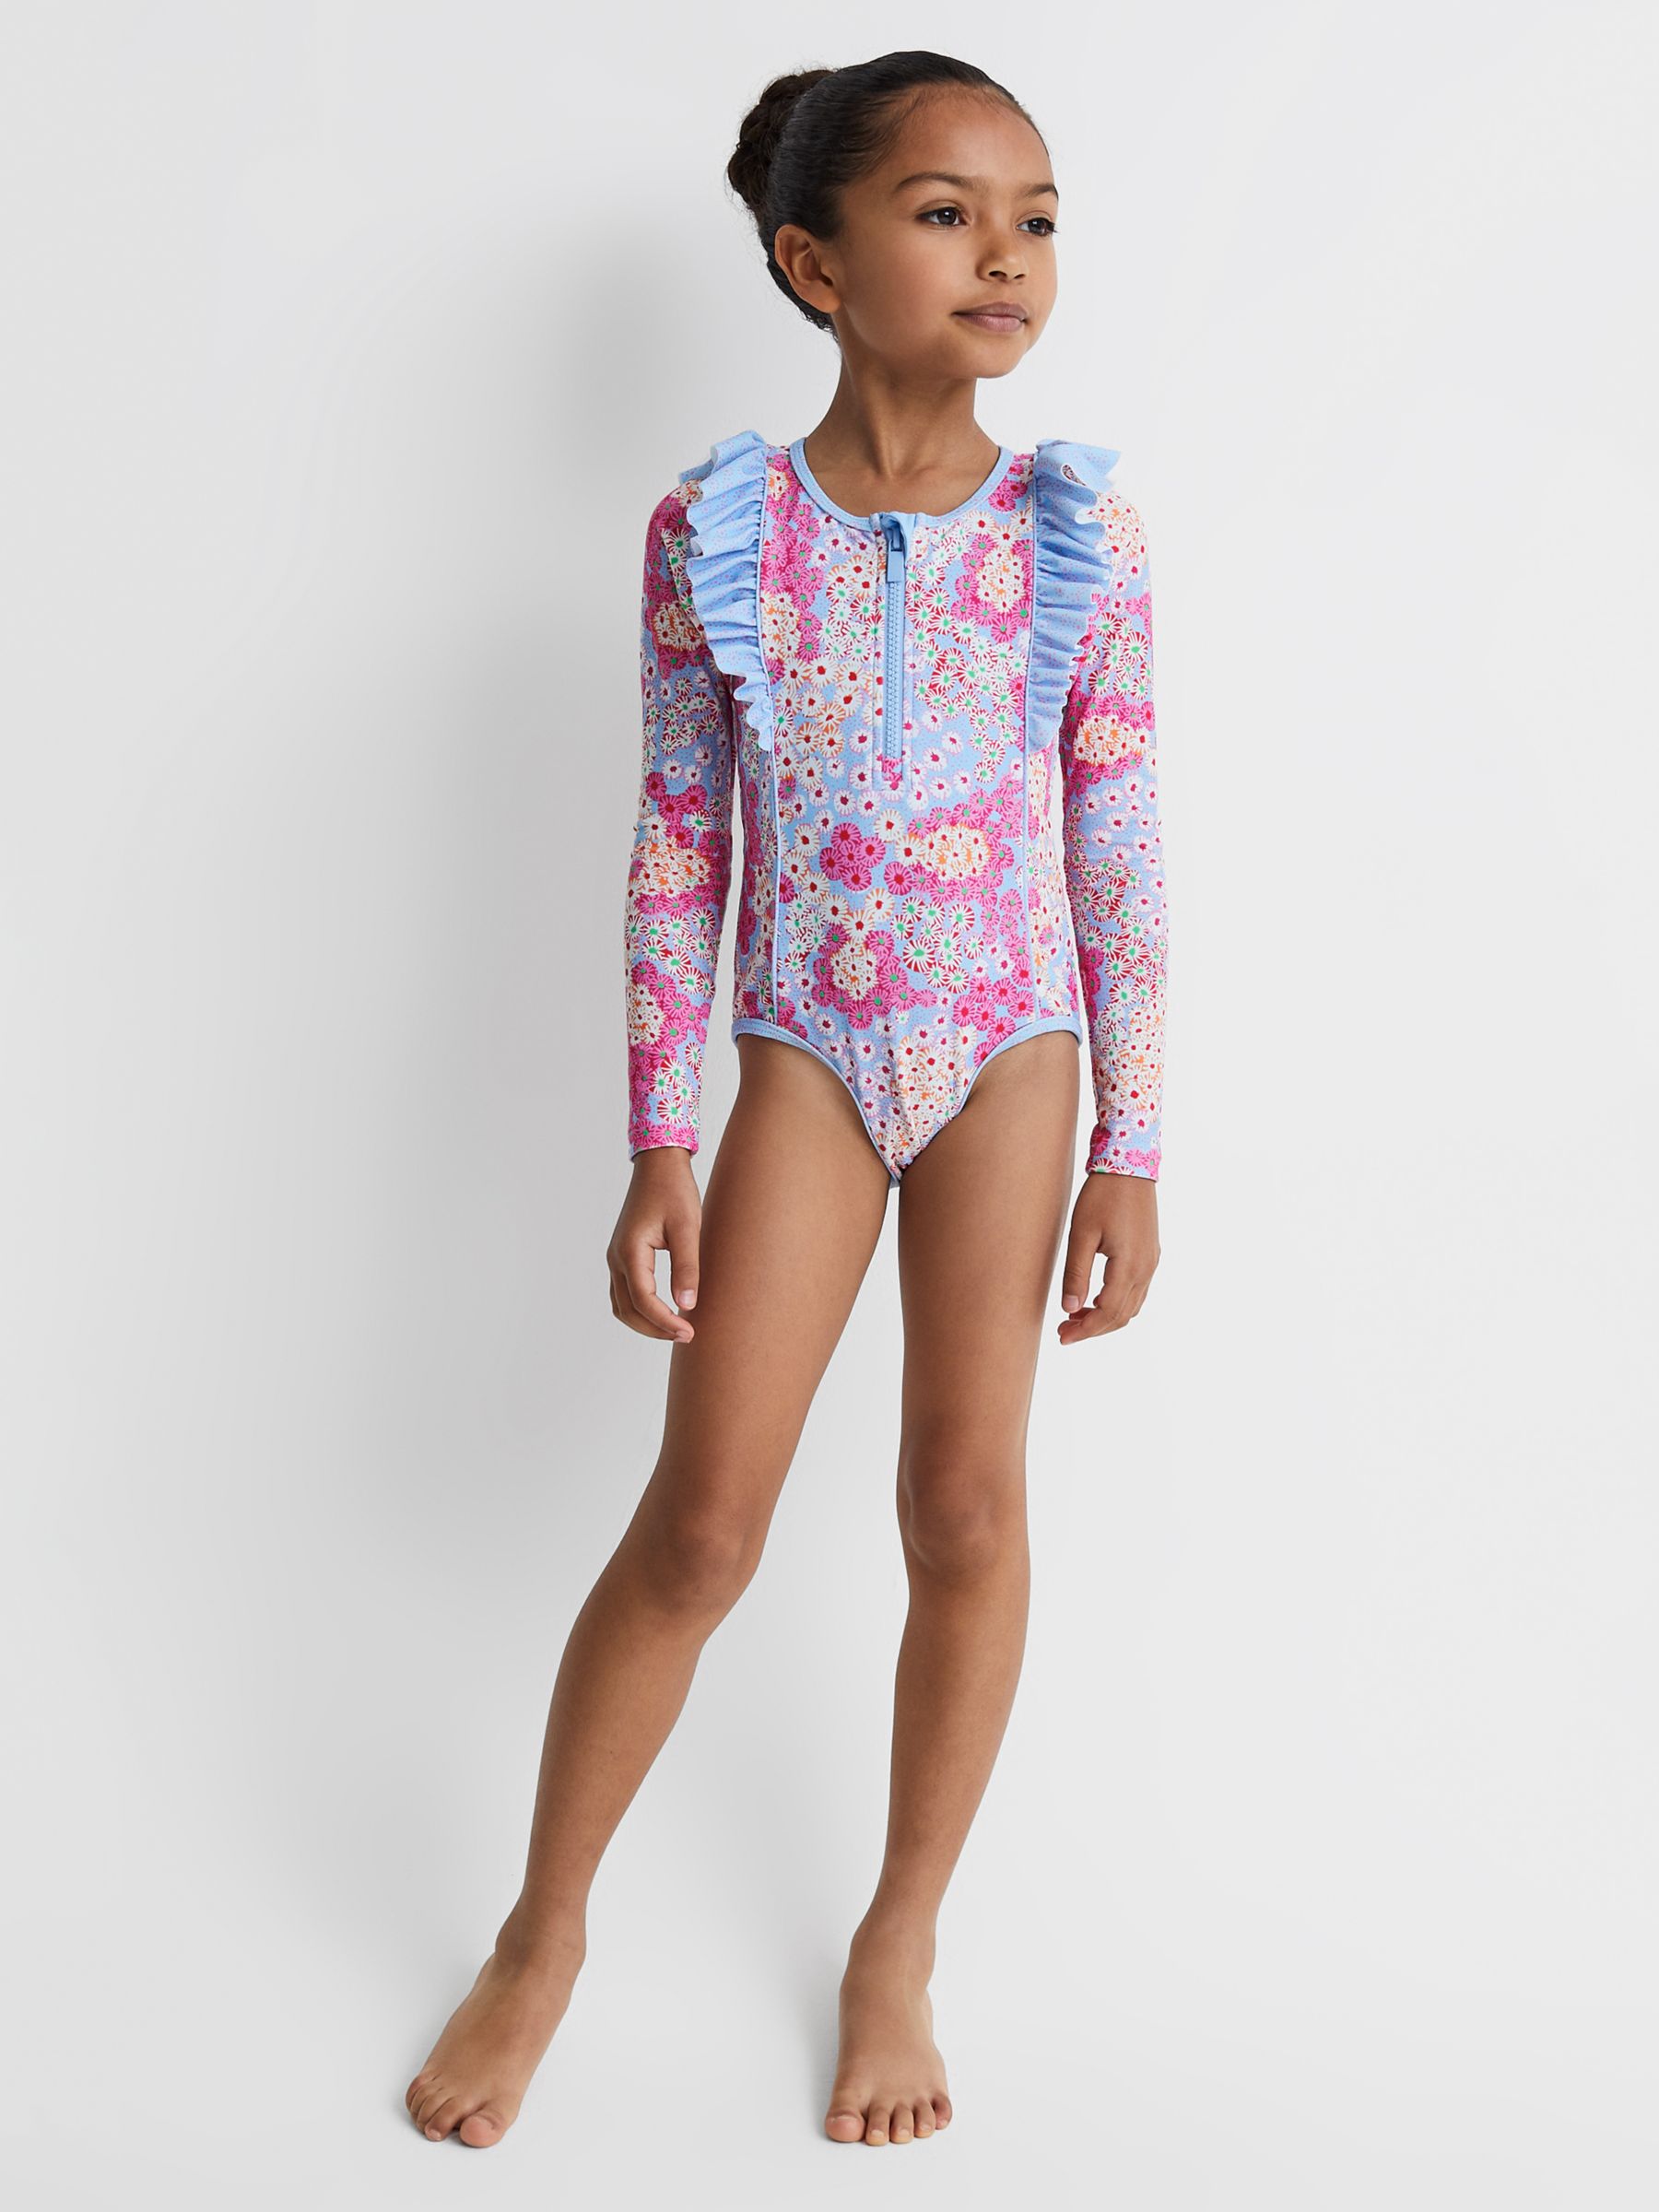 Buy Reiss Kids' Poppy Floral Print Ruffle Sunsafe Swimsuit, Pink/Multi Online at johnlewis.com